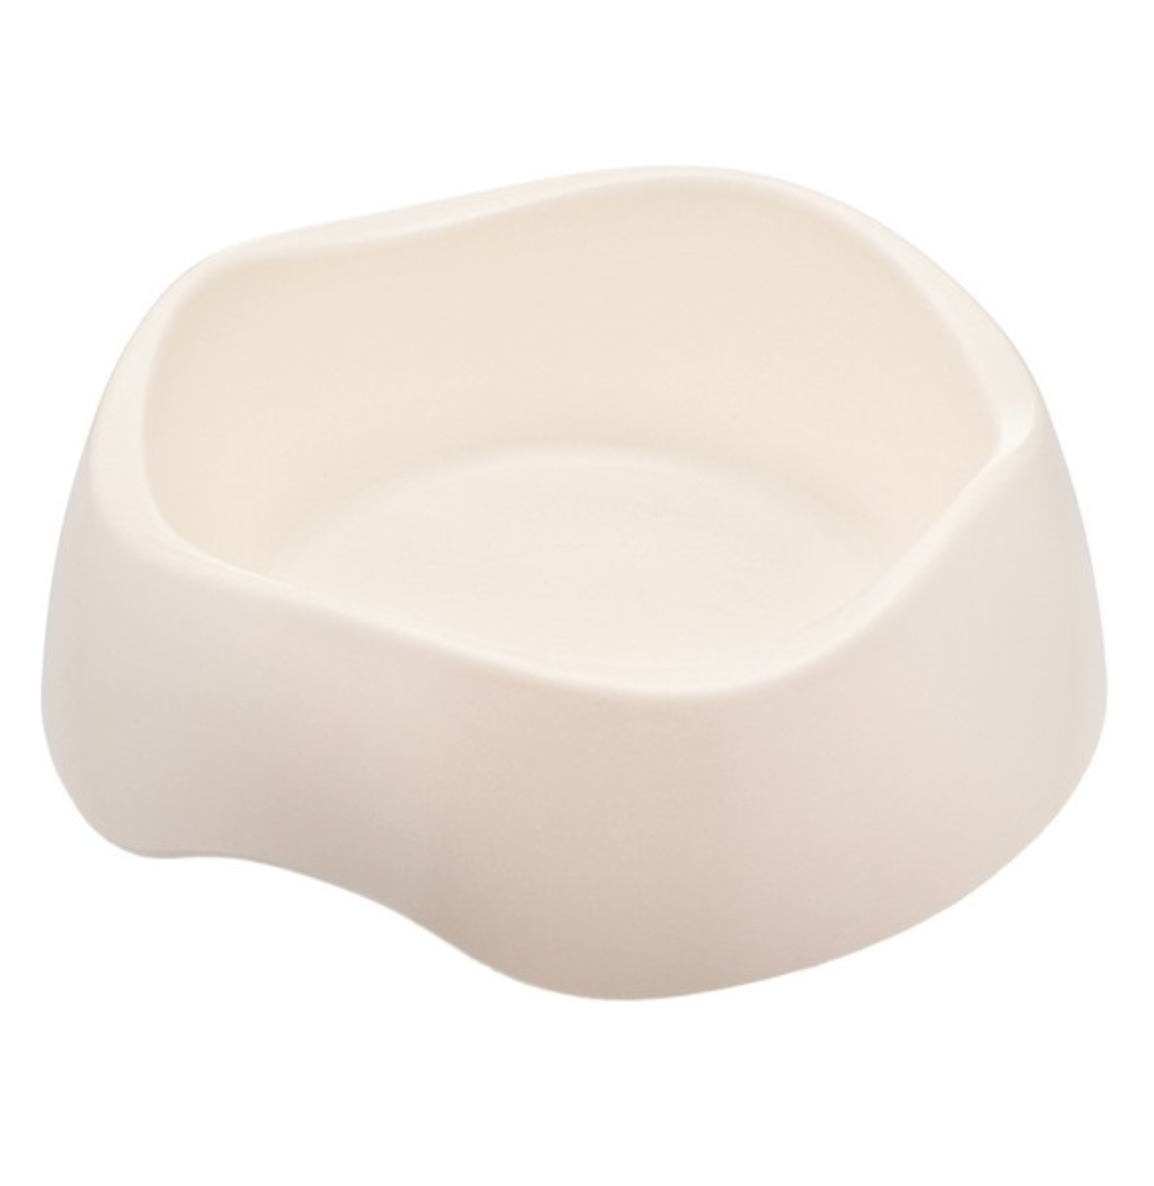 Beco Food and Water Bowl (White)